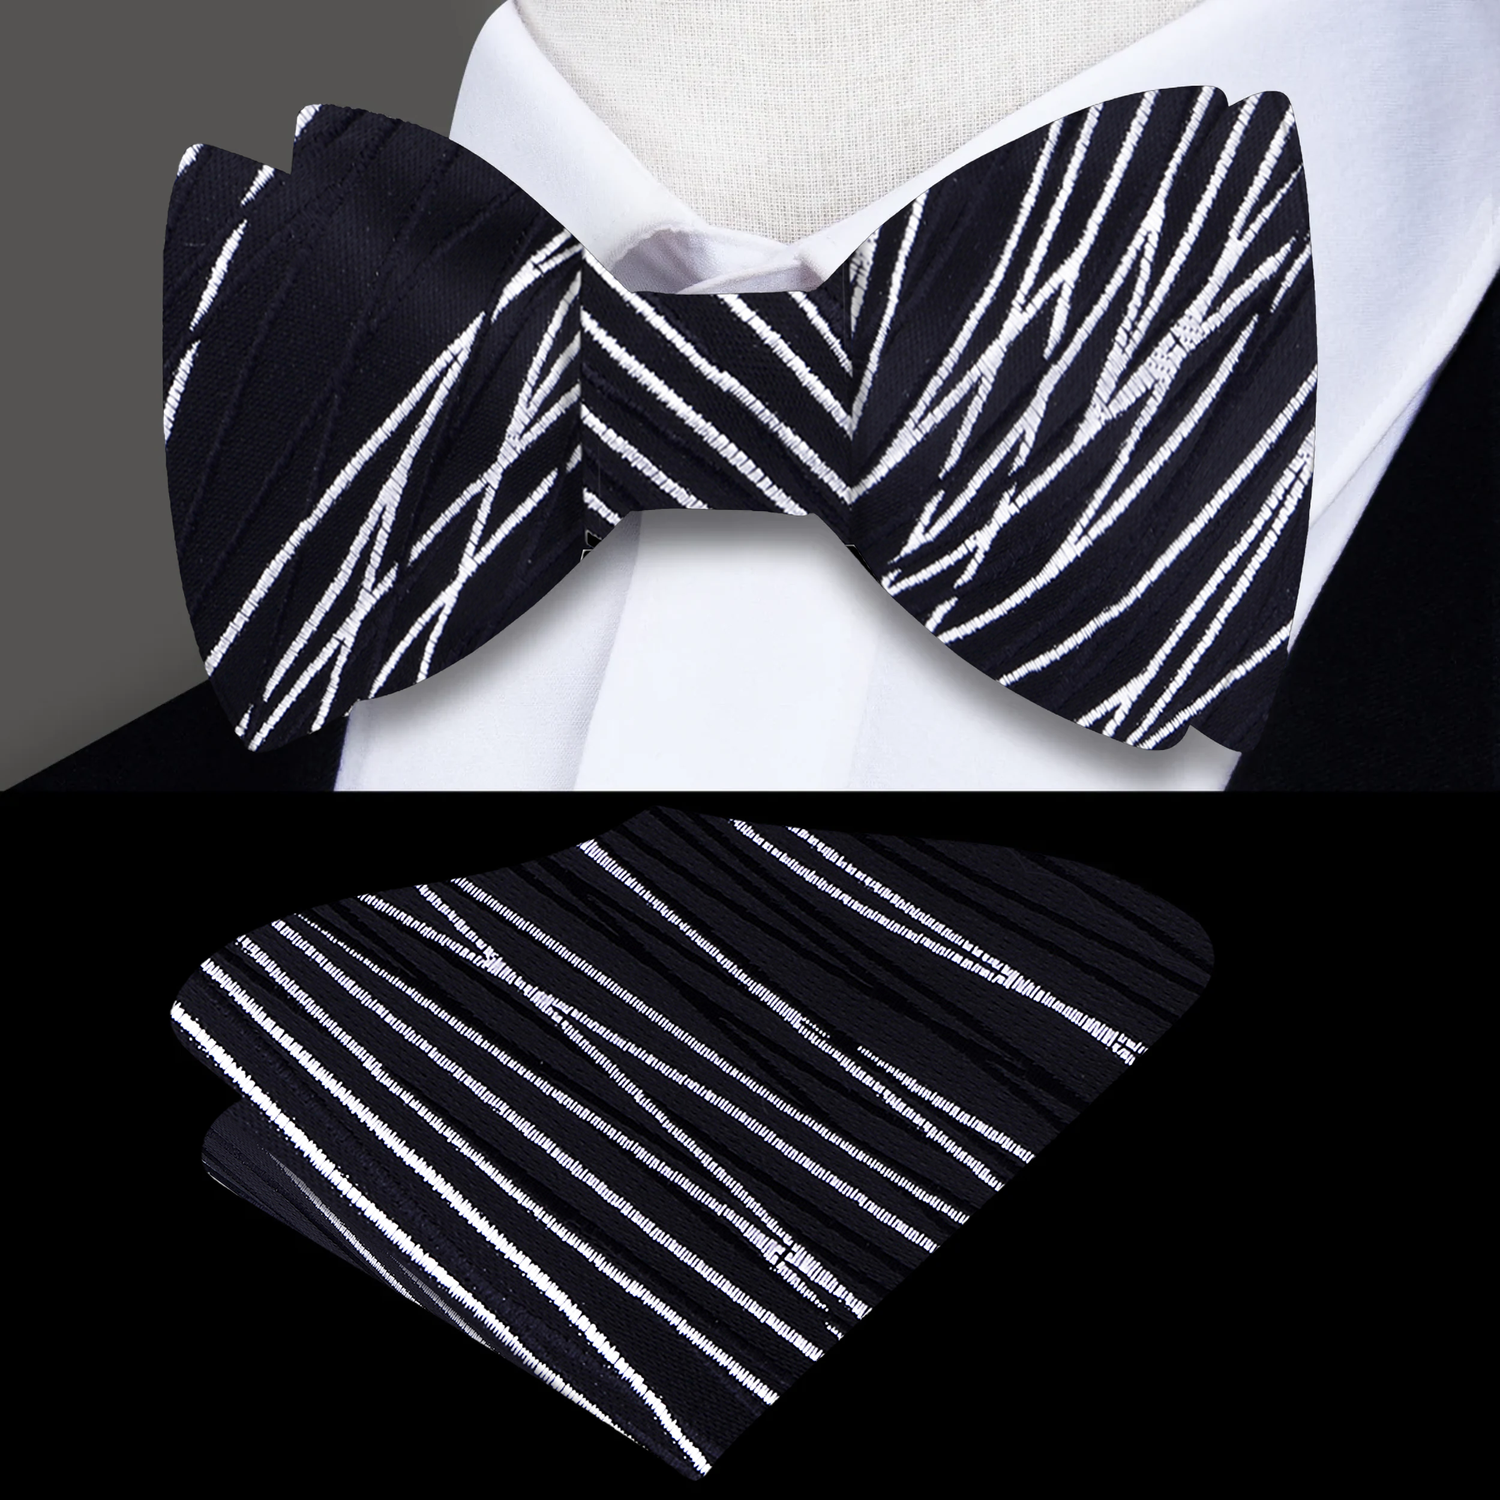 A Black, White Abstract Intersecting Lines Pattern Silk Self Tie Bow Tie, Matching Pocket Square